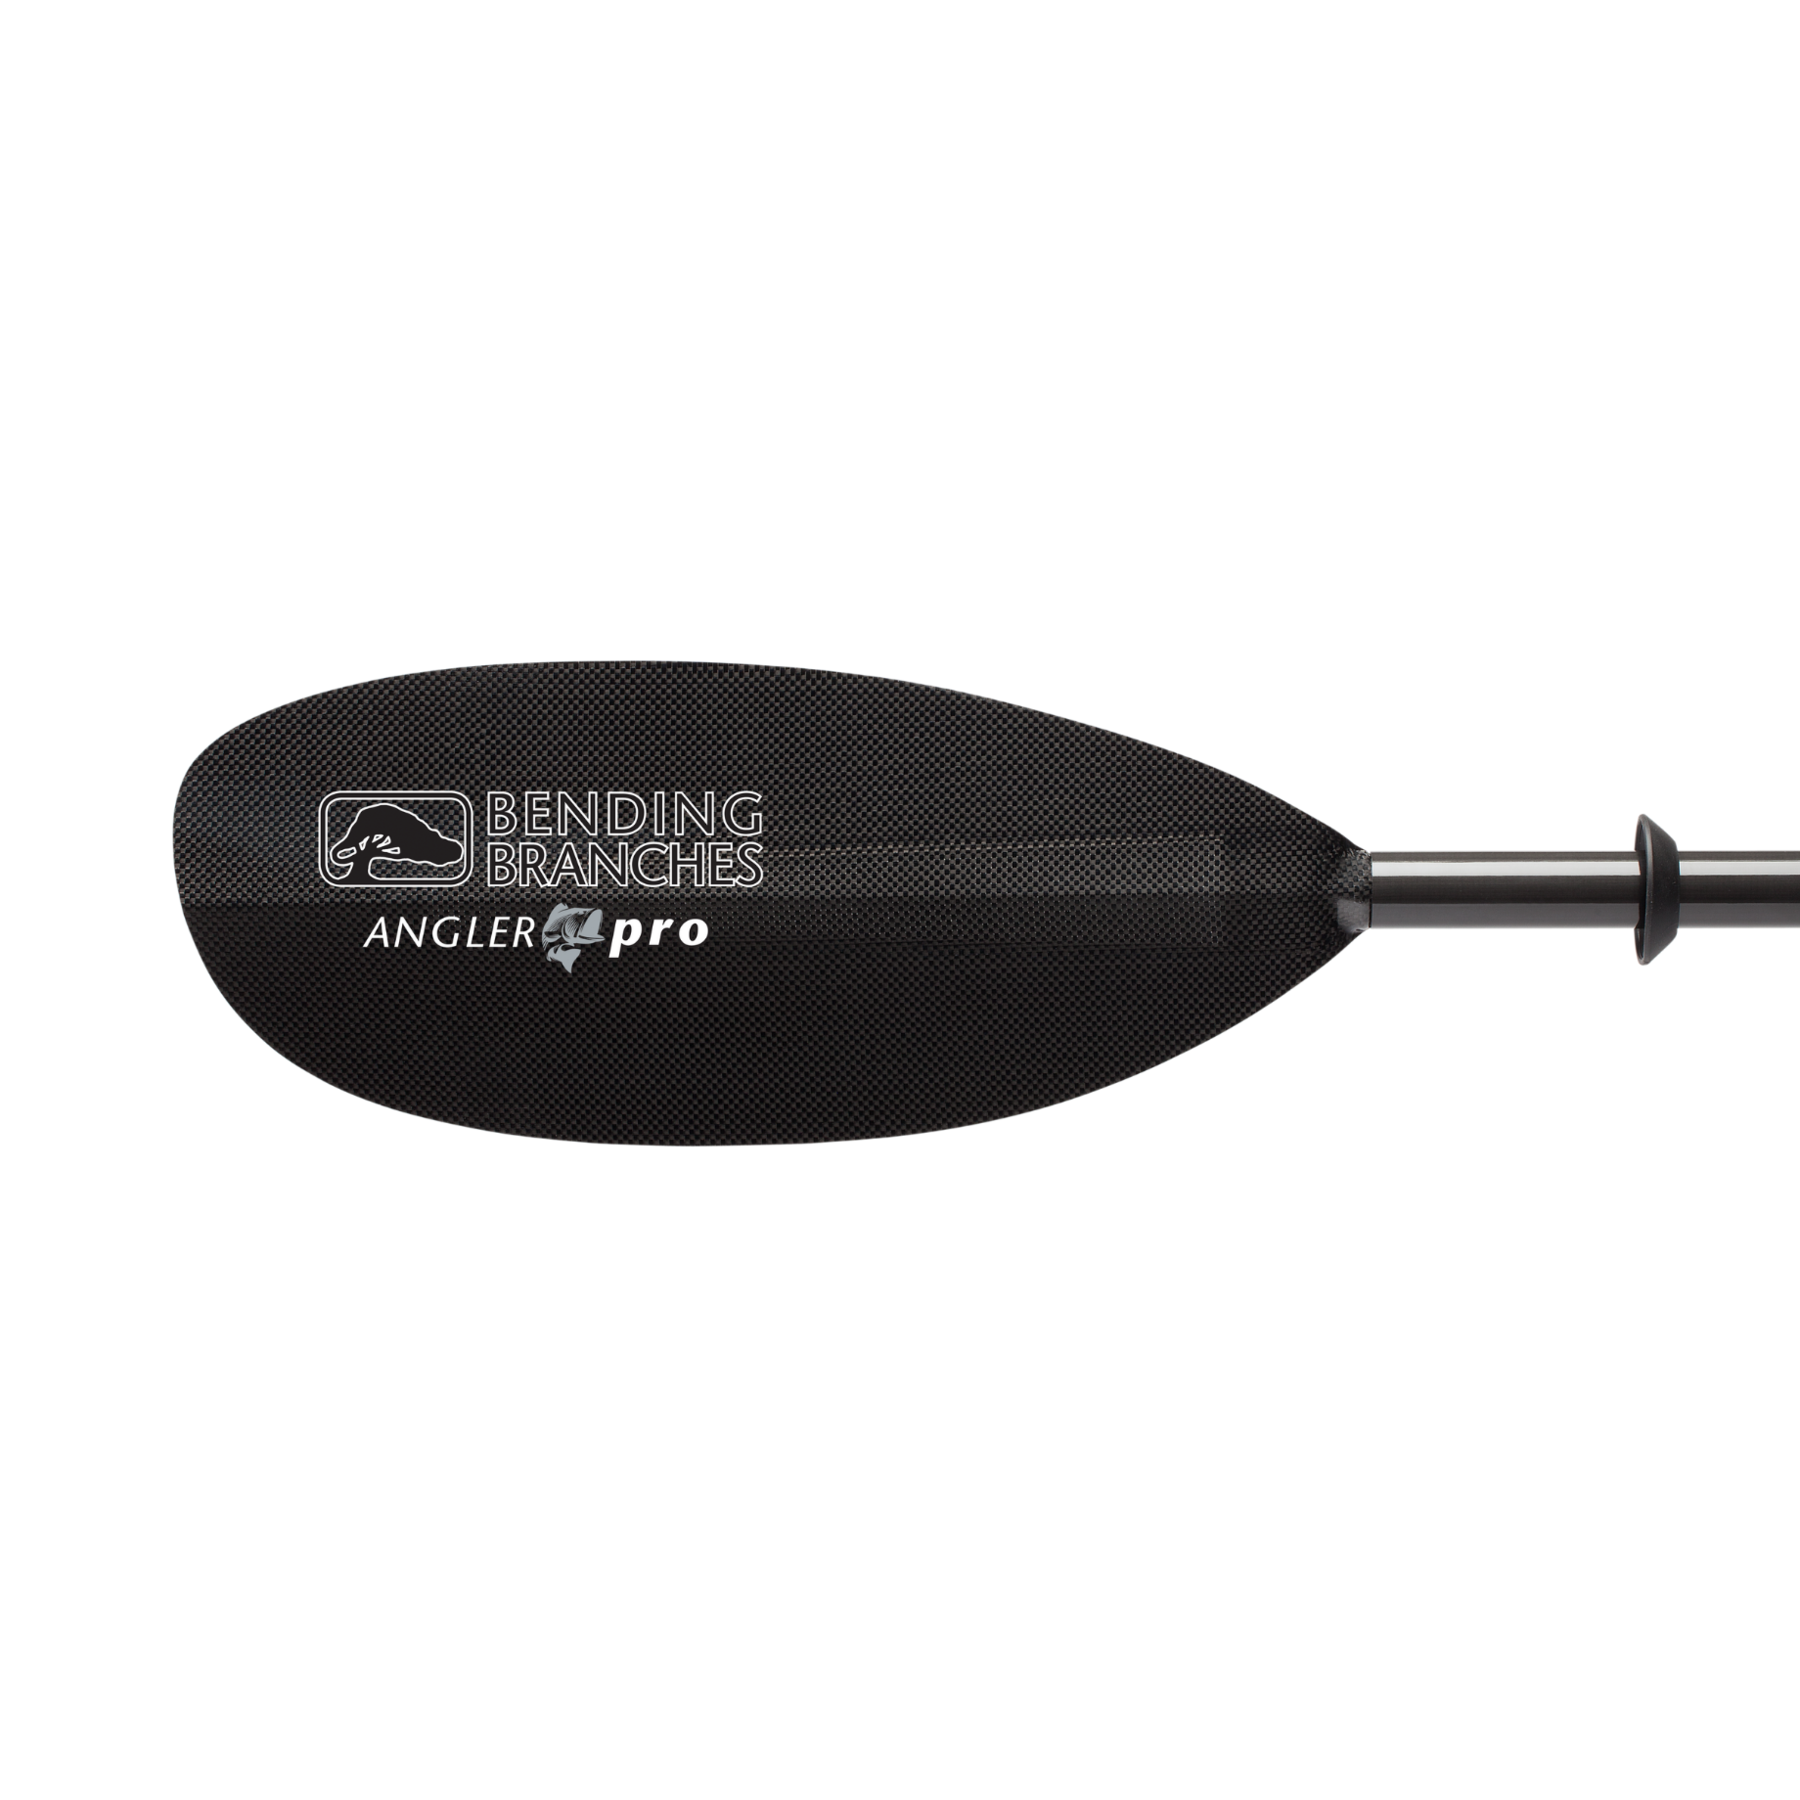 Bending Branches - Angler Pro PLUS Carbon - Frontenac Outfitters Canoe   Kayak Centre